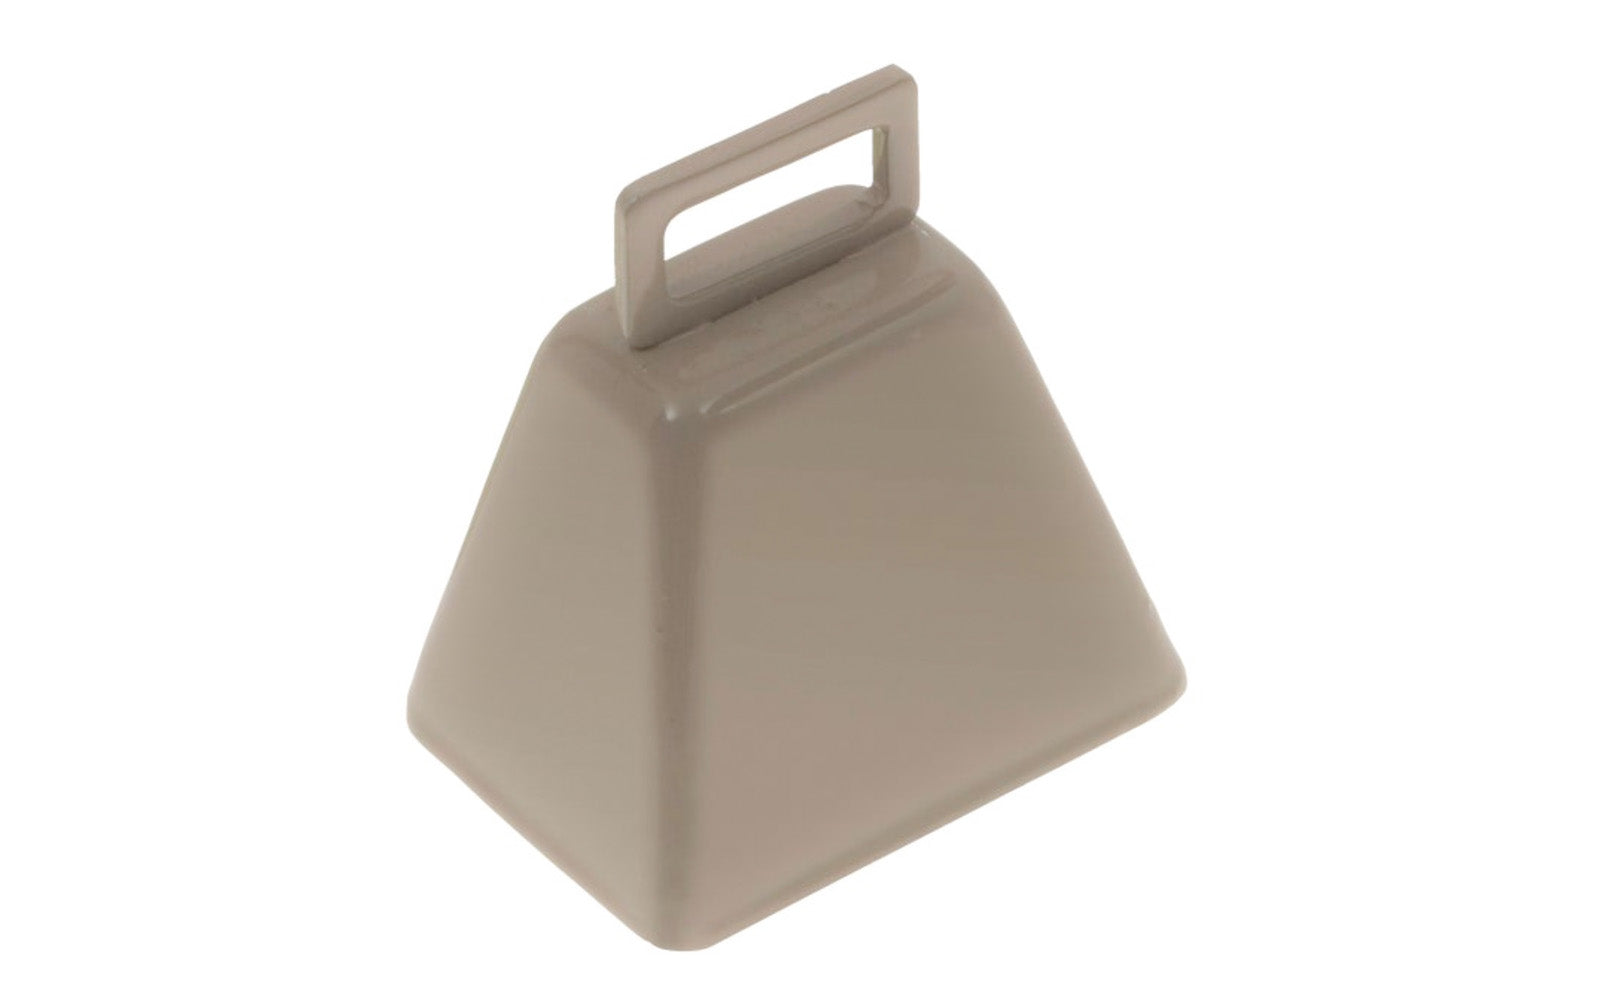 1-5/8" Size Cow Bell. Produces a dull tone that can be heard from far distances. Steel welded construction. Ideal for livestock control & use at sporting events. Powder-coated. SpeeCo Model No. S90070800-CB900708.